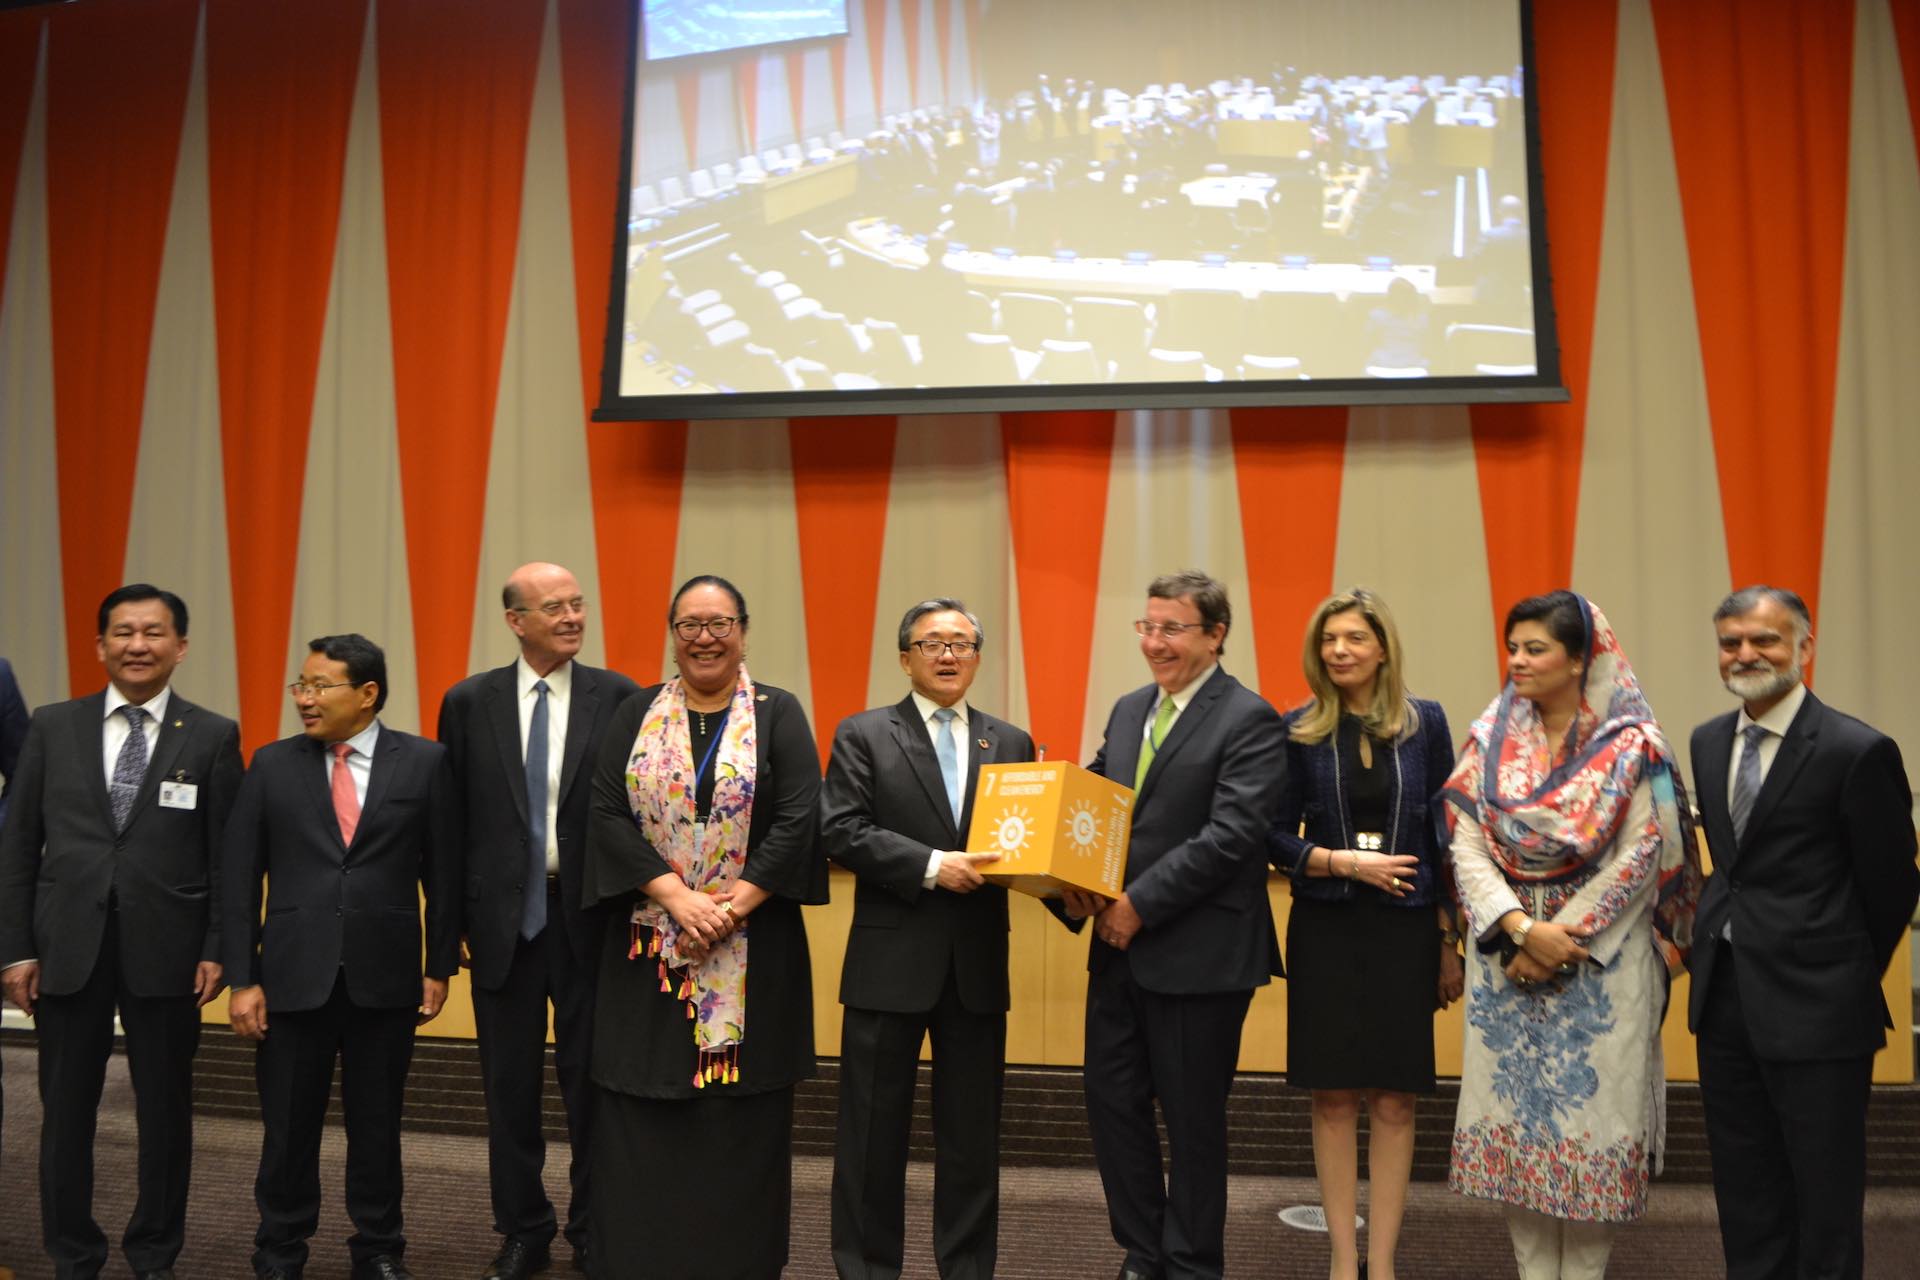 Picture taken at the 23-24 May 2019 HLPF conference